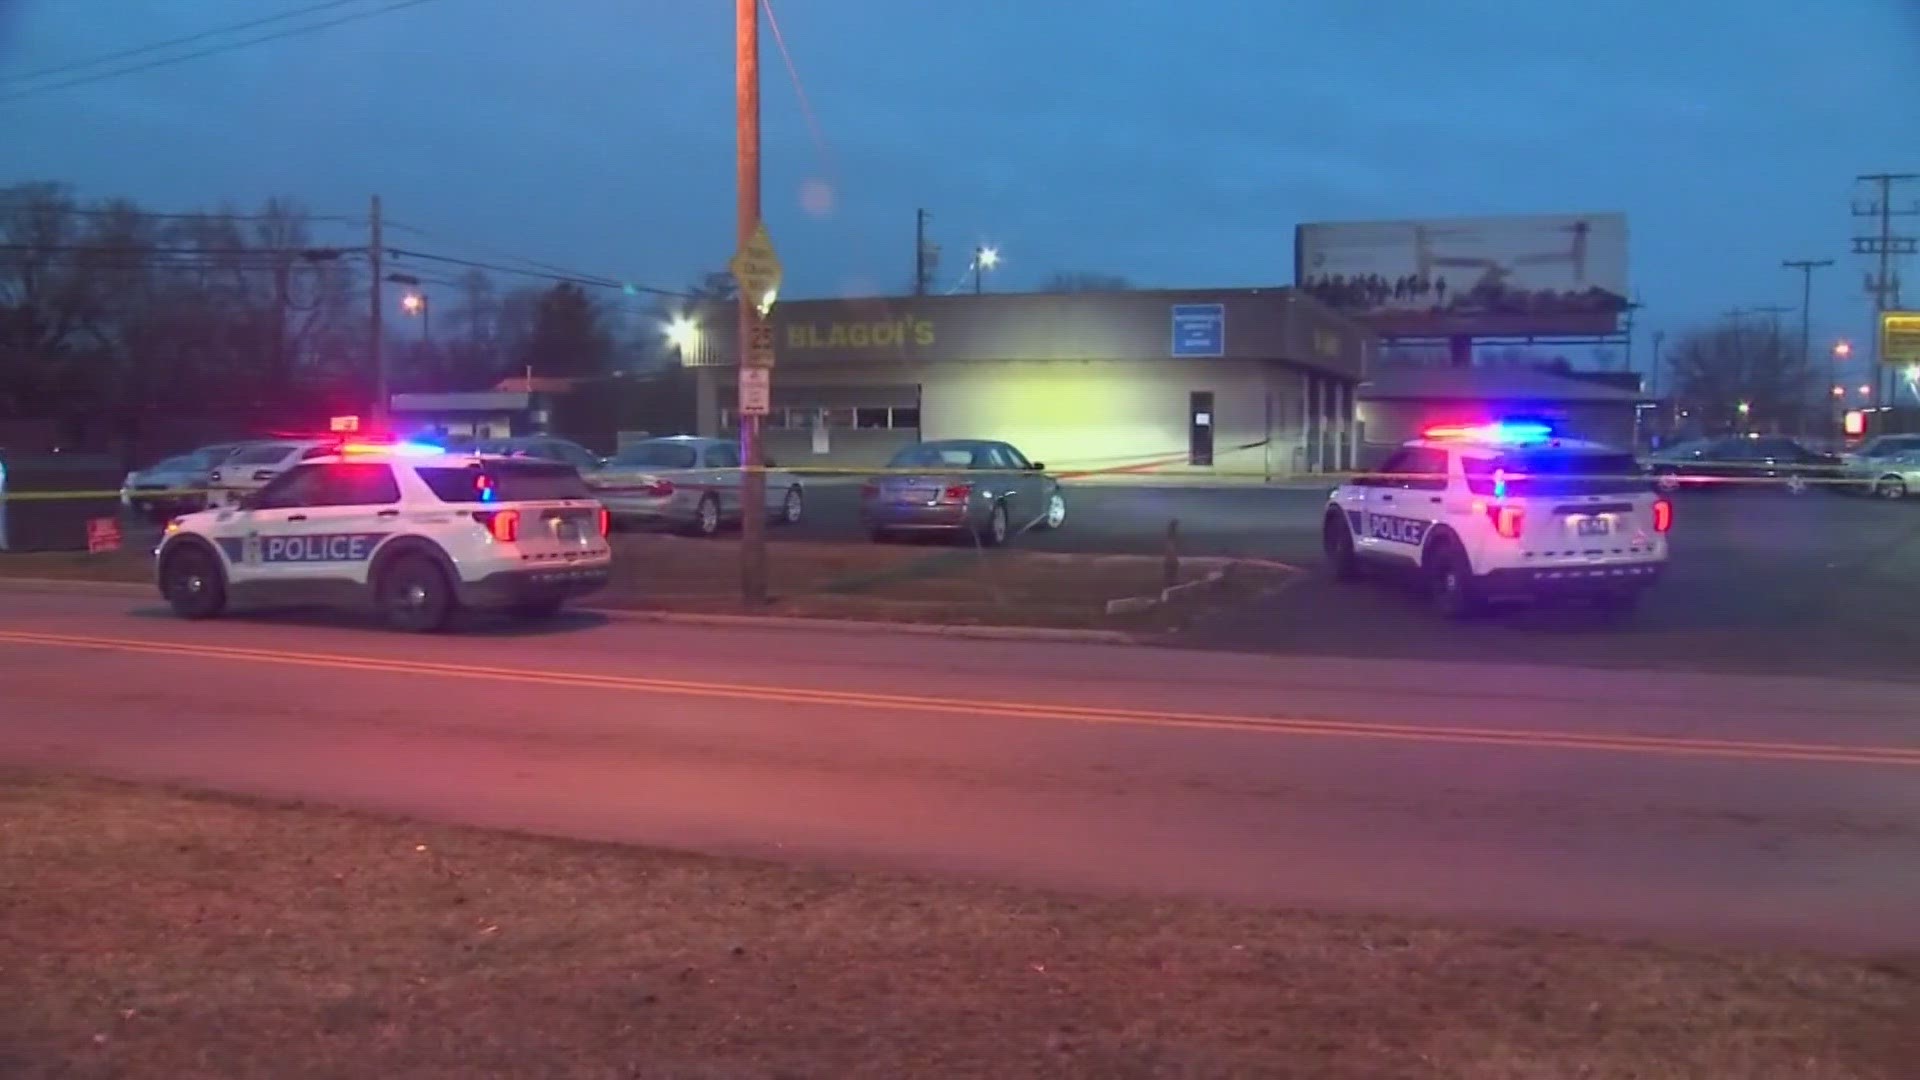 East Columbus after-hours club shuts down after deadly shooting | 10tv.com